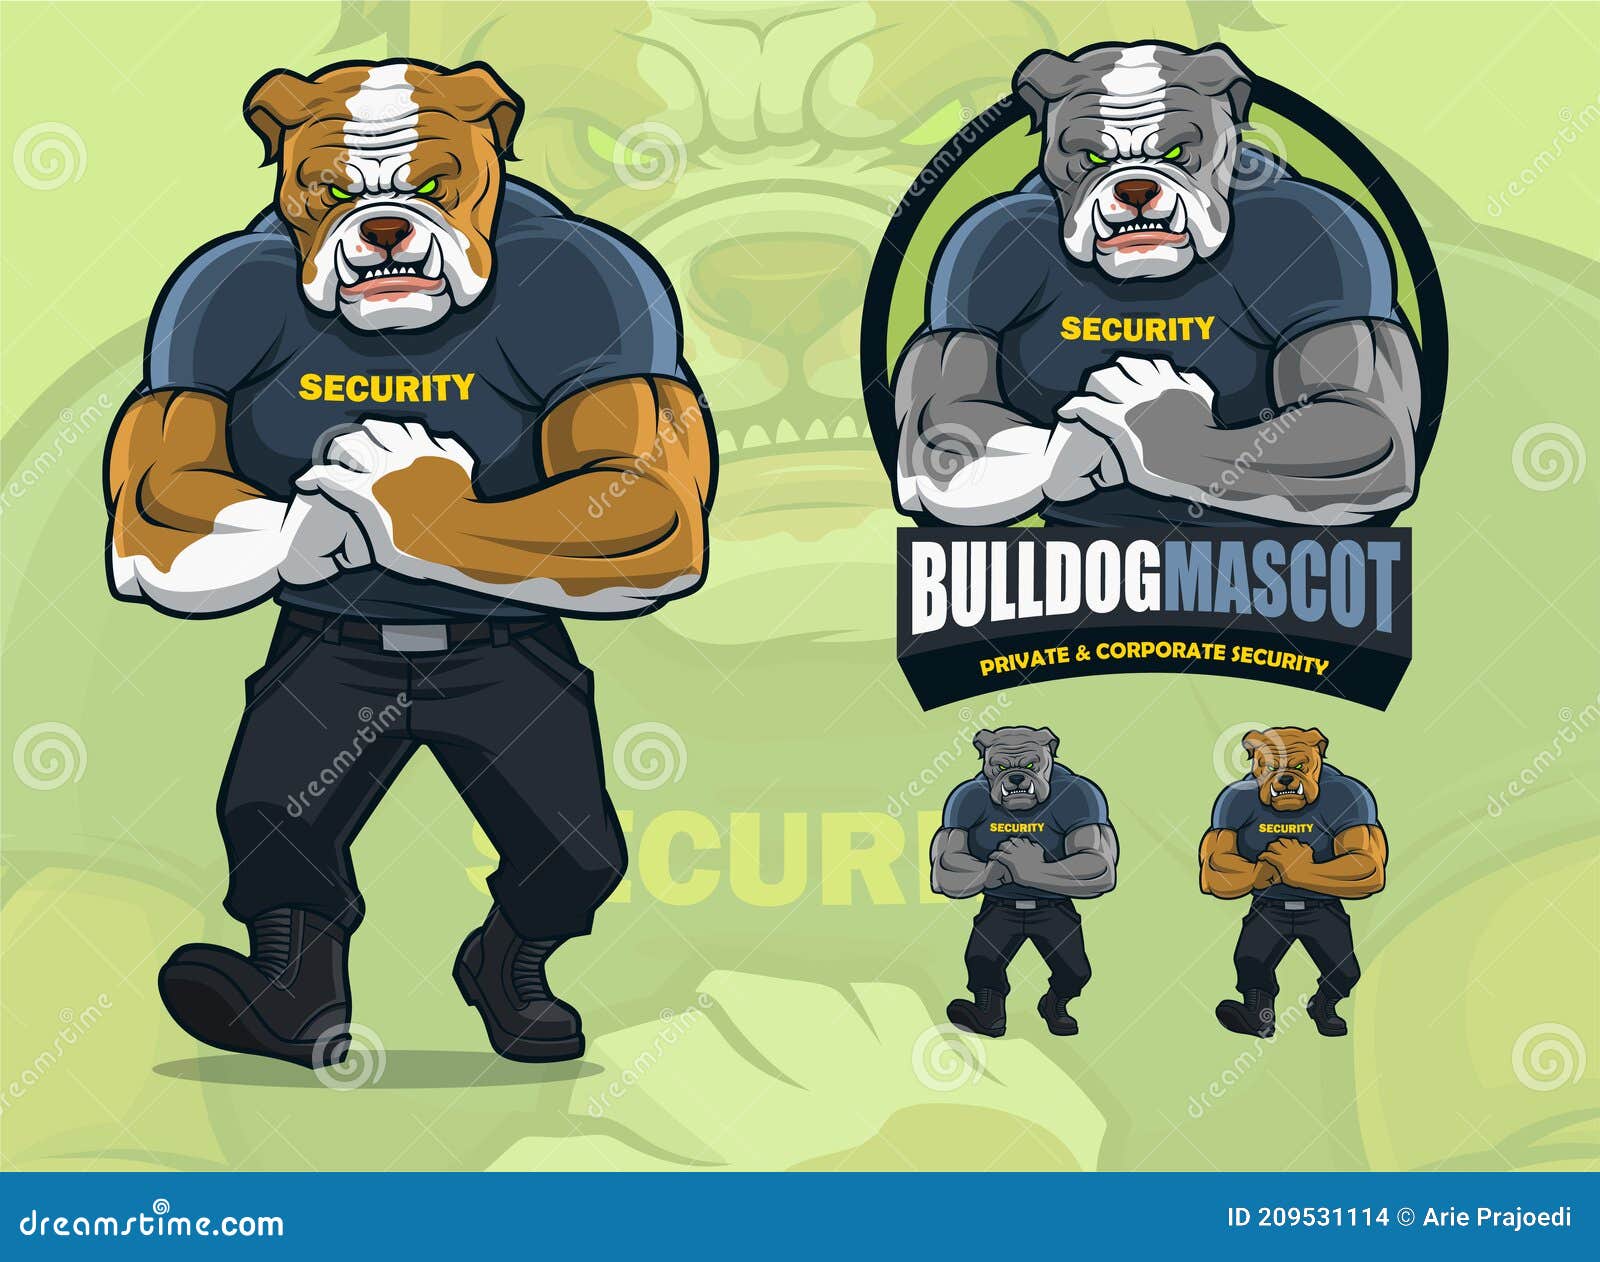 bulldog mascot for security company with optional skin colors